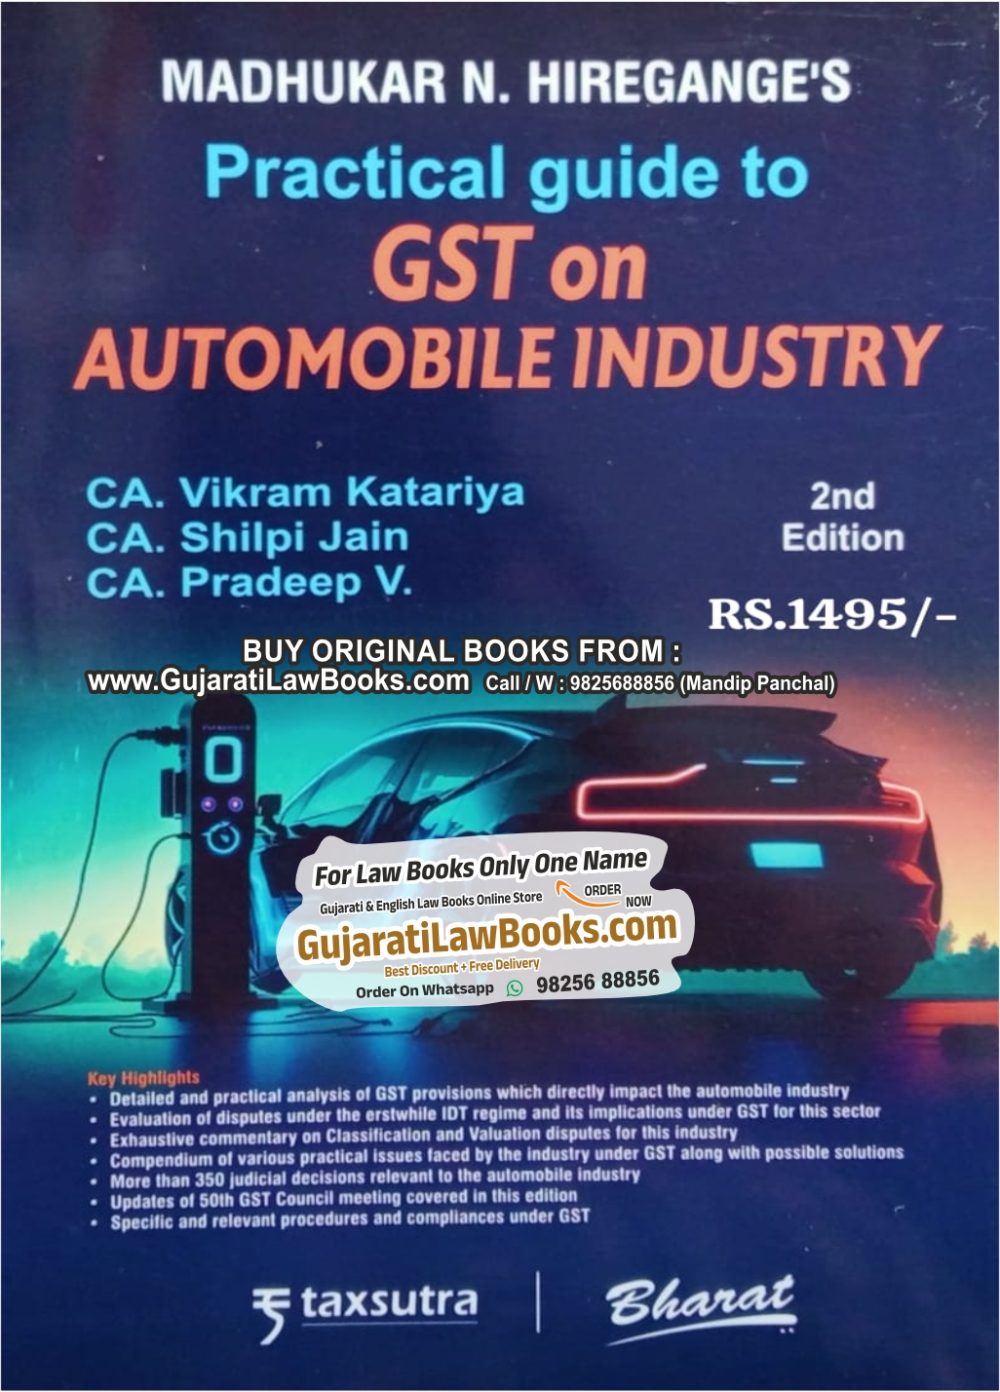 Practical Guide to GST on Automobile Industry by Madhukar N Hiregange - Latest 2nd Edition October 2023 Bharat Taxutra